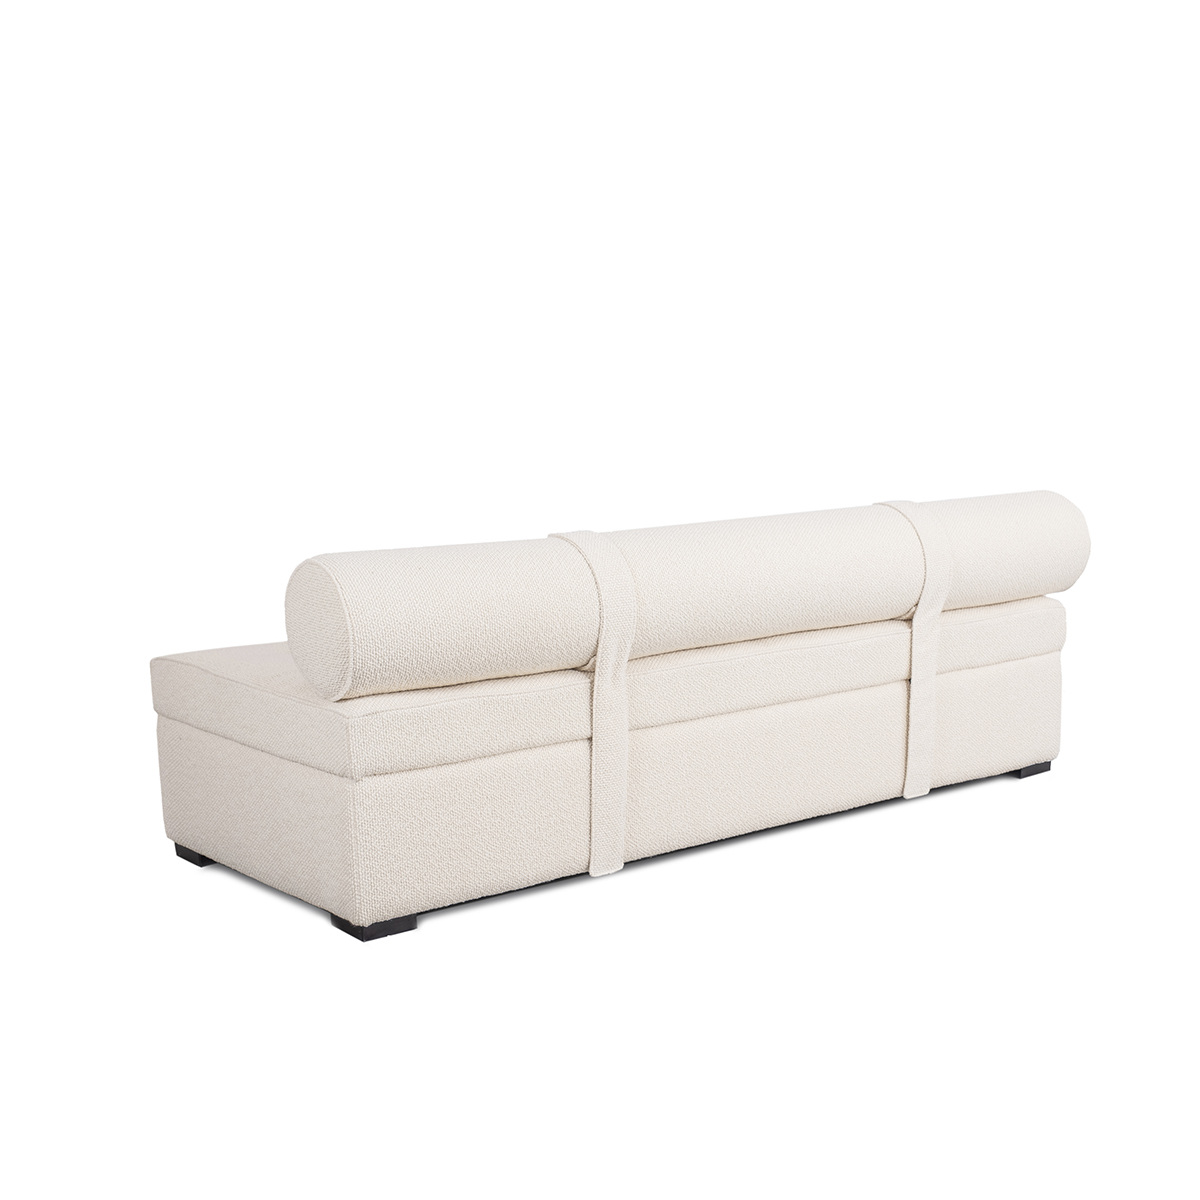 Banquette Jacob, White - L185 x W75 x H40 - Curly wool - image 4